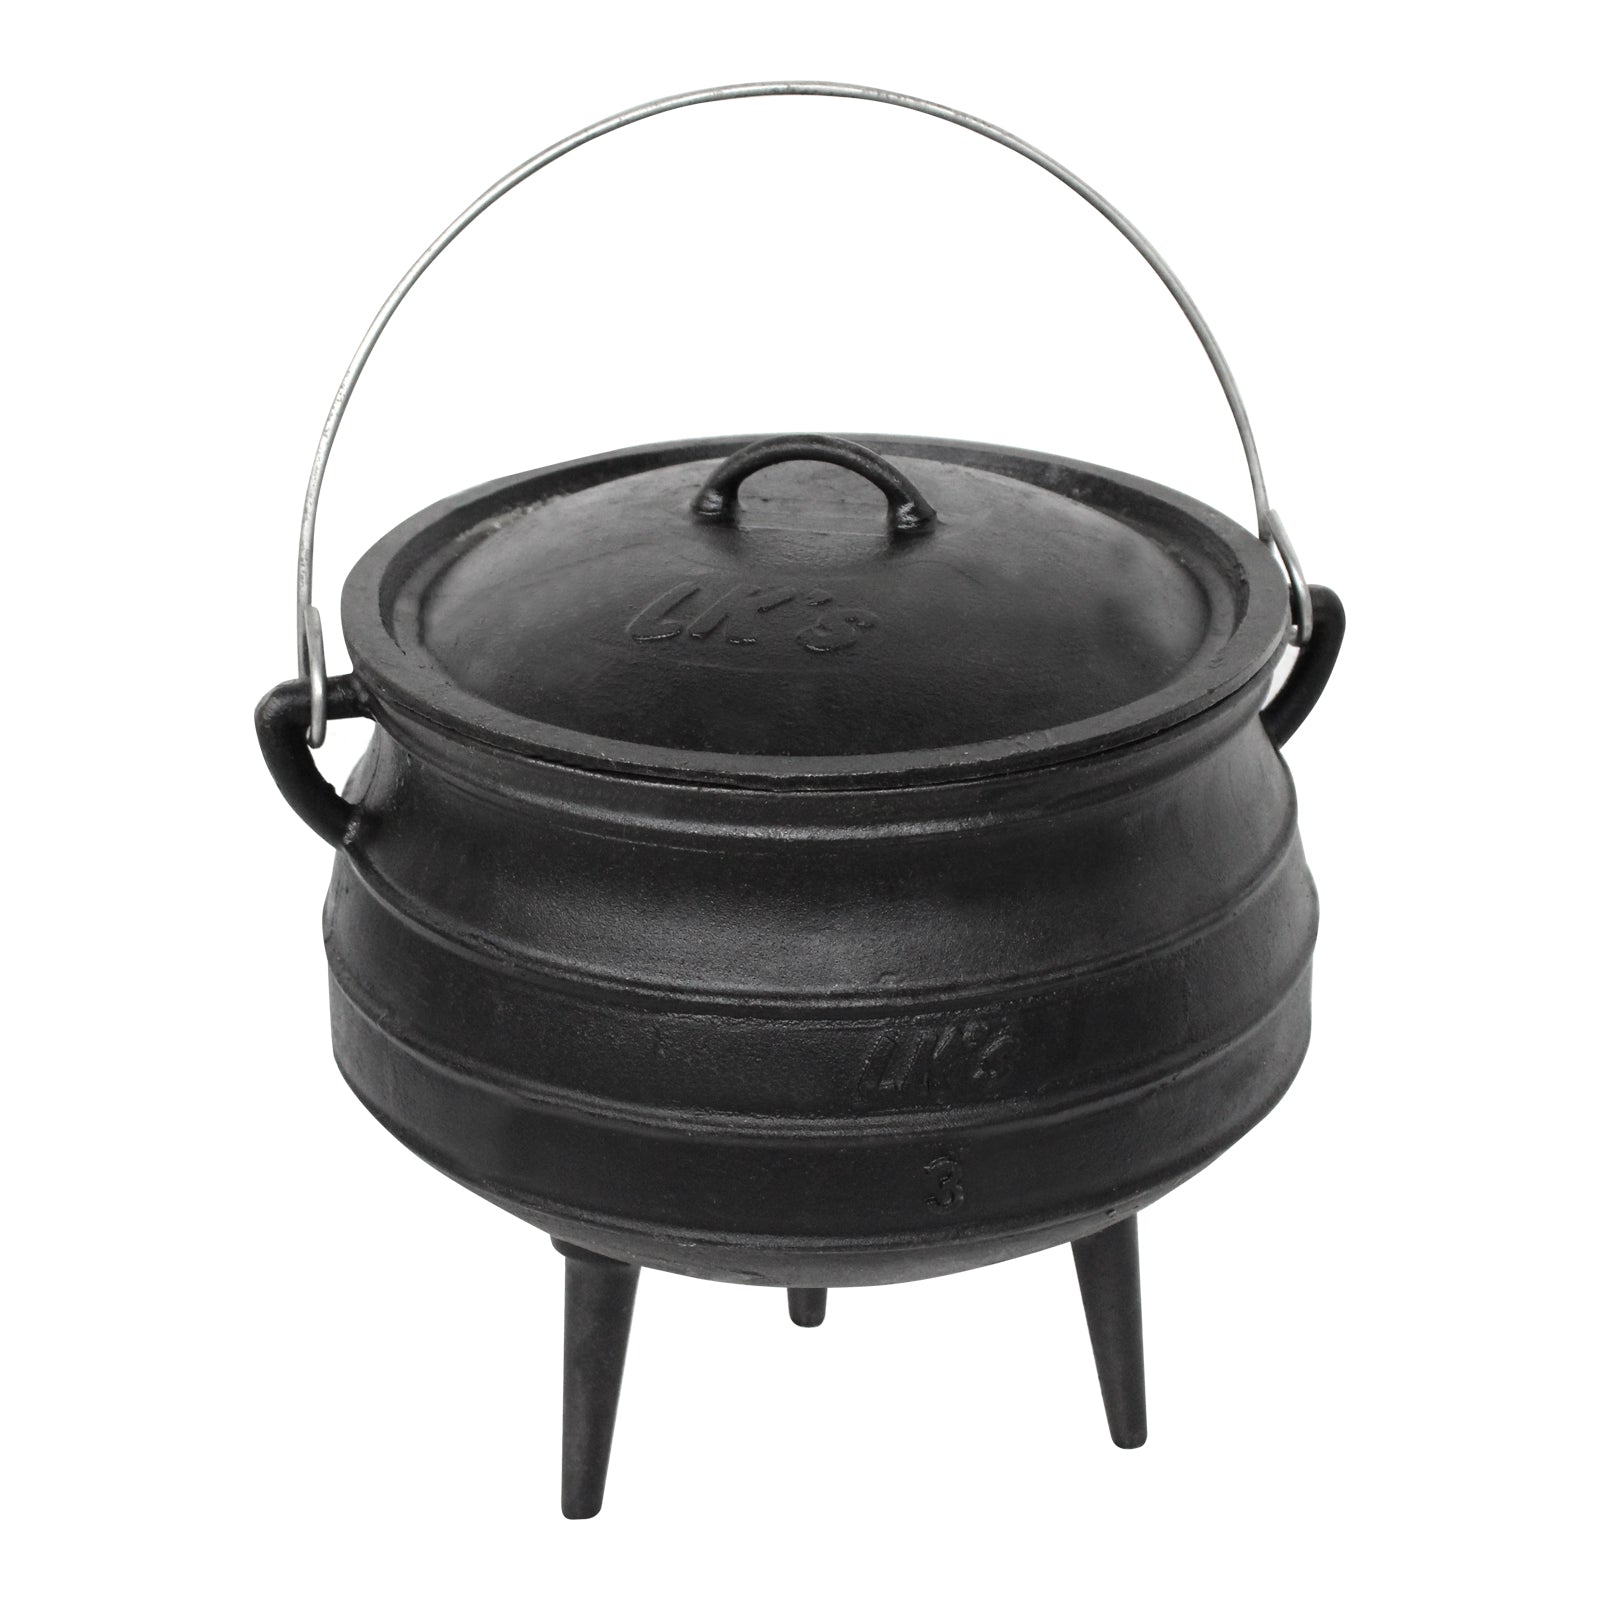 Size 3 Potjie Cooking Pot with Lid